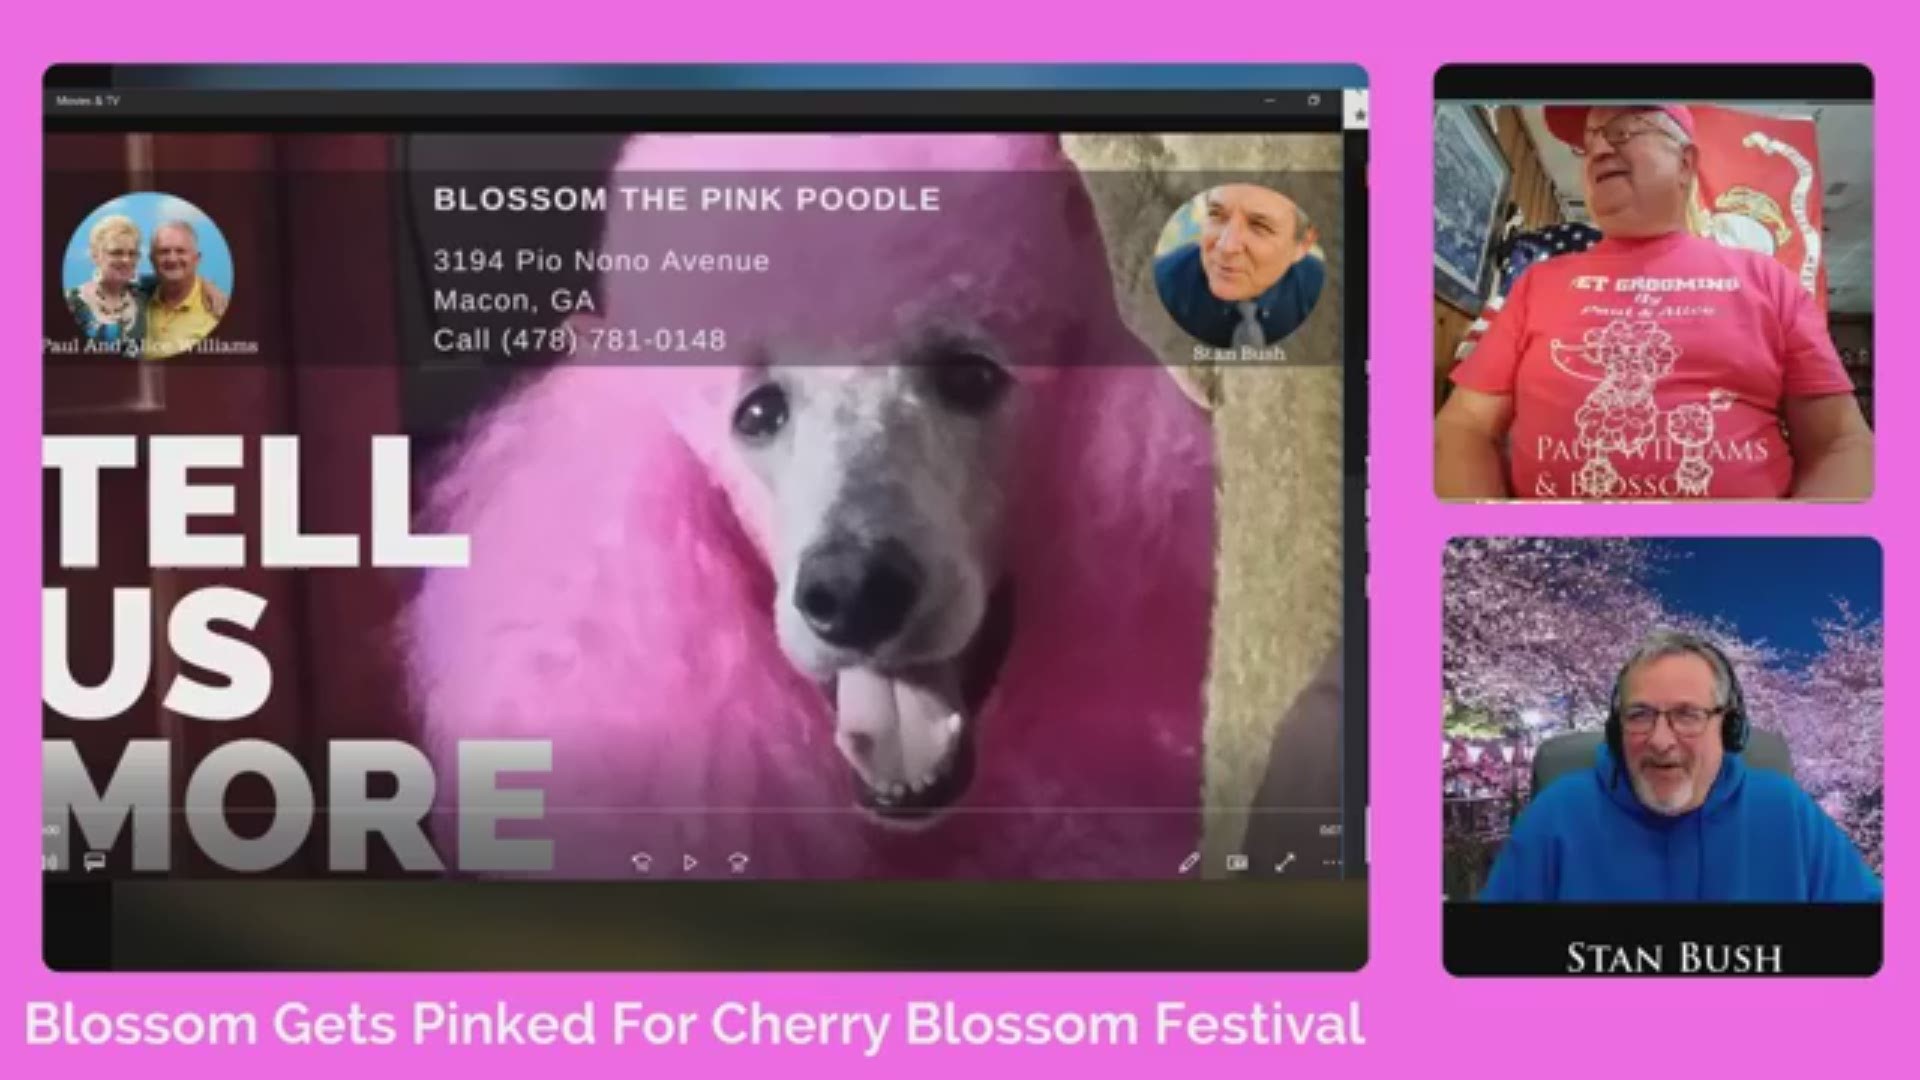 'Blossom the Pink Poodle' turns pink for this year's Cherry Blossom Festival. Video courtesy of Stan Bush, Paul Williams.